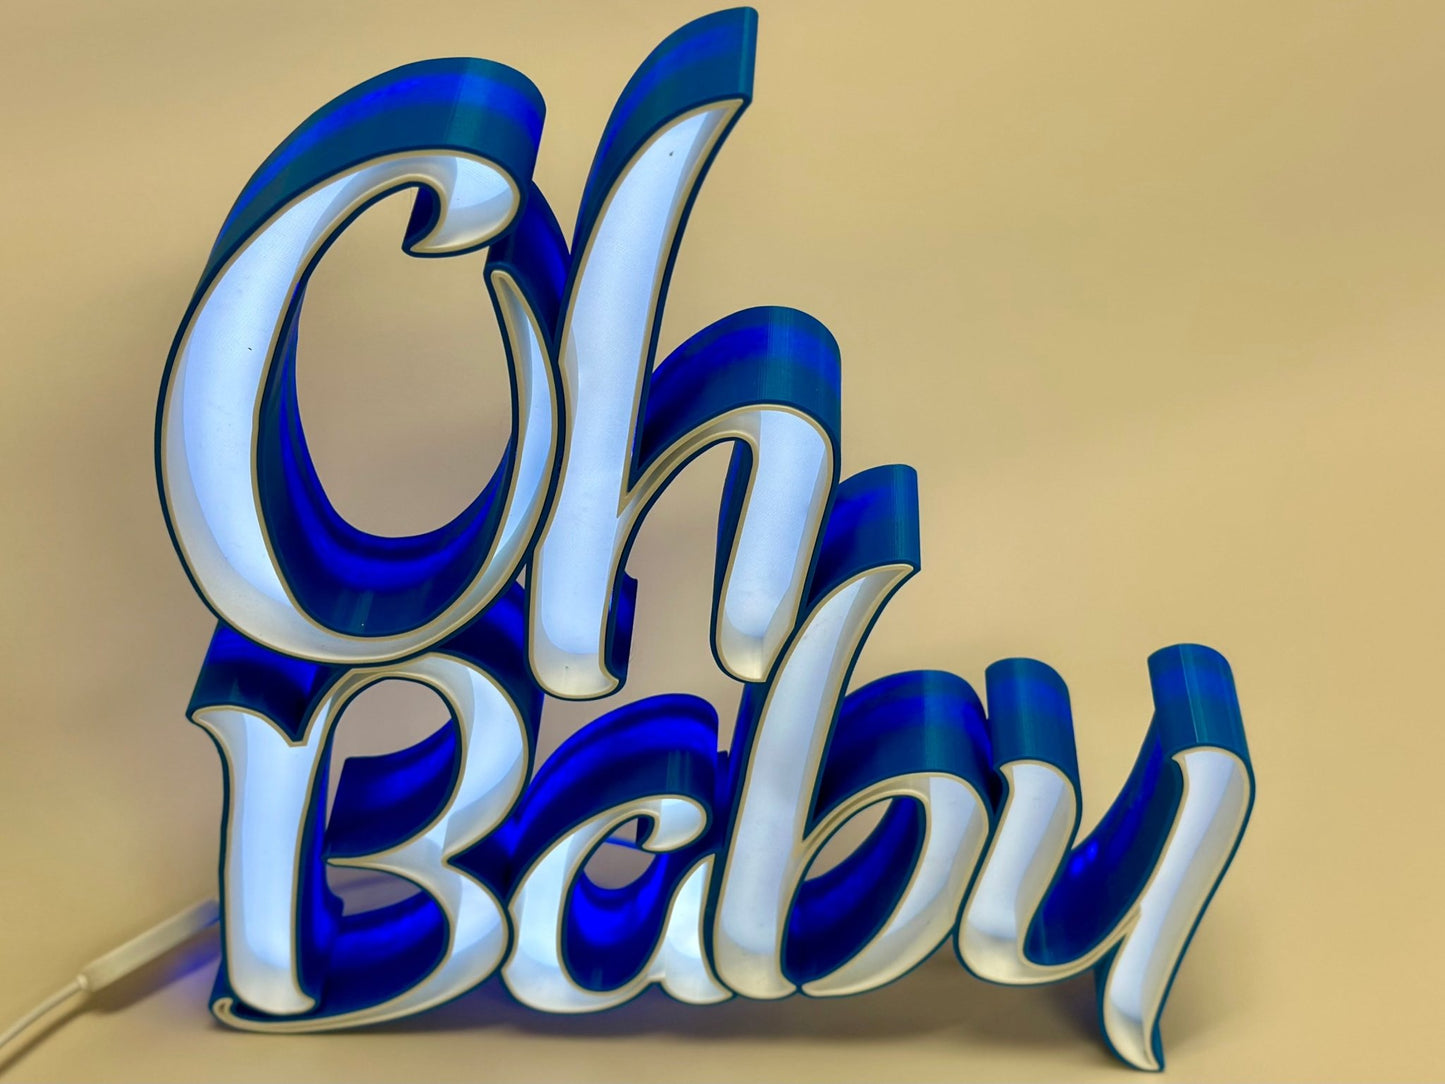 “Oh Baby” 3D Printed Led Decor - Rude Grain3d Printed led Lit Sign